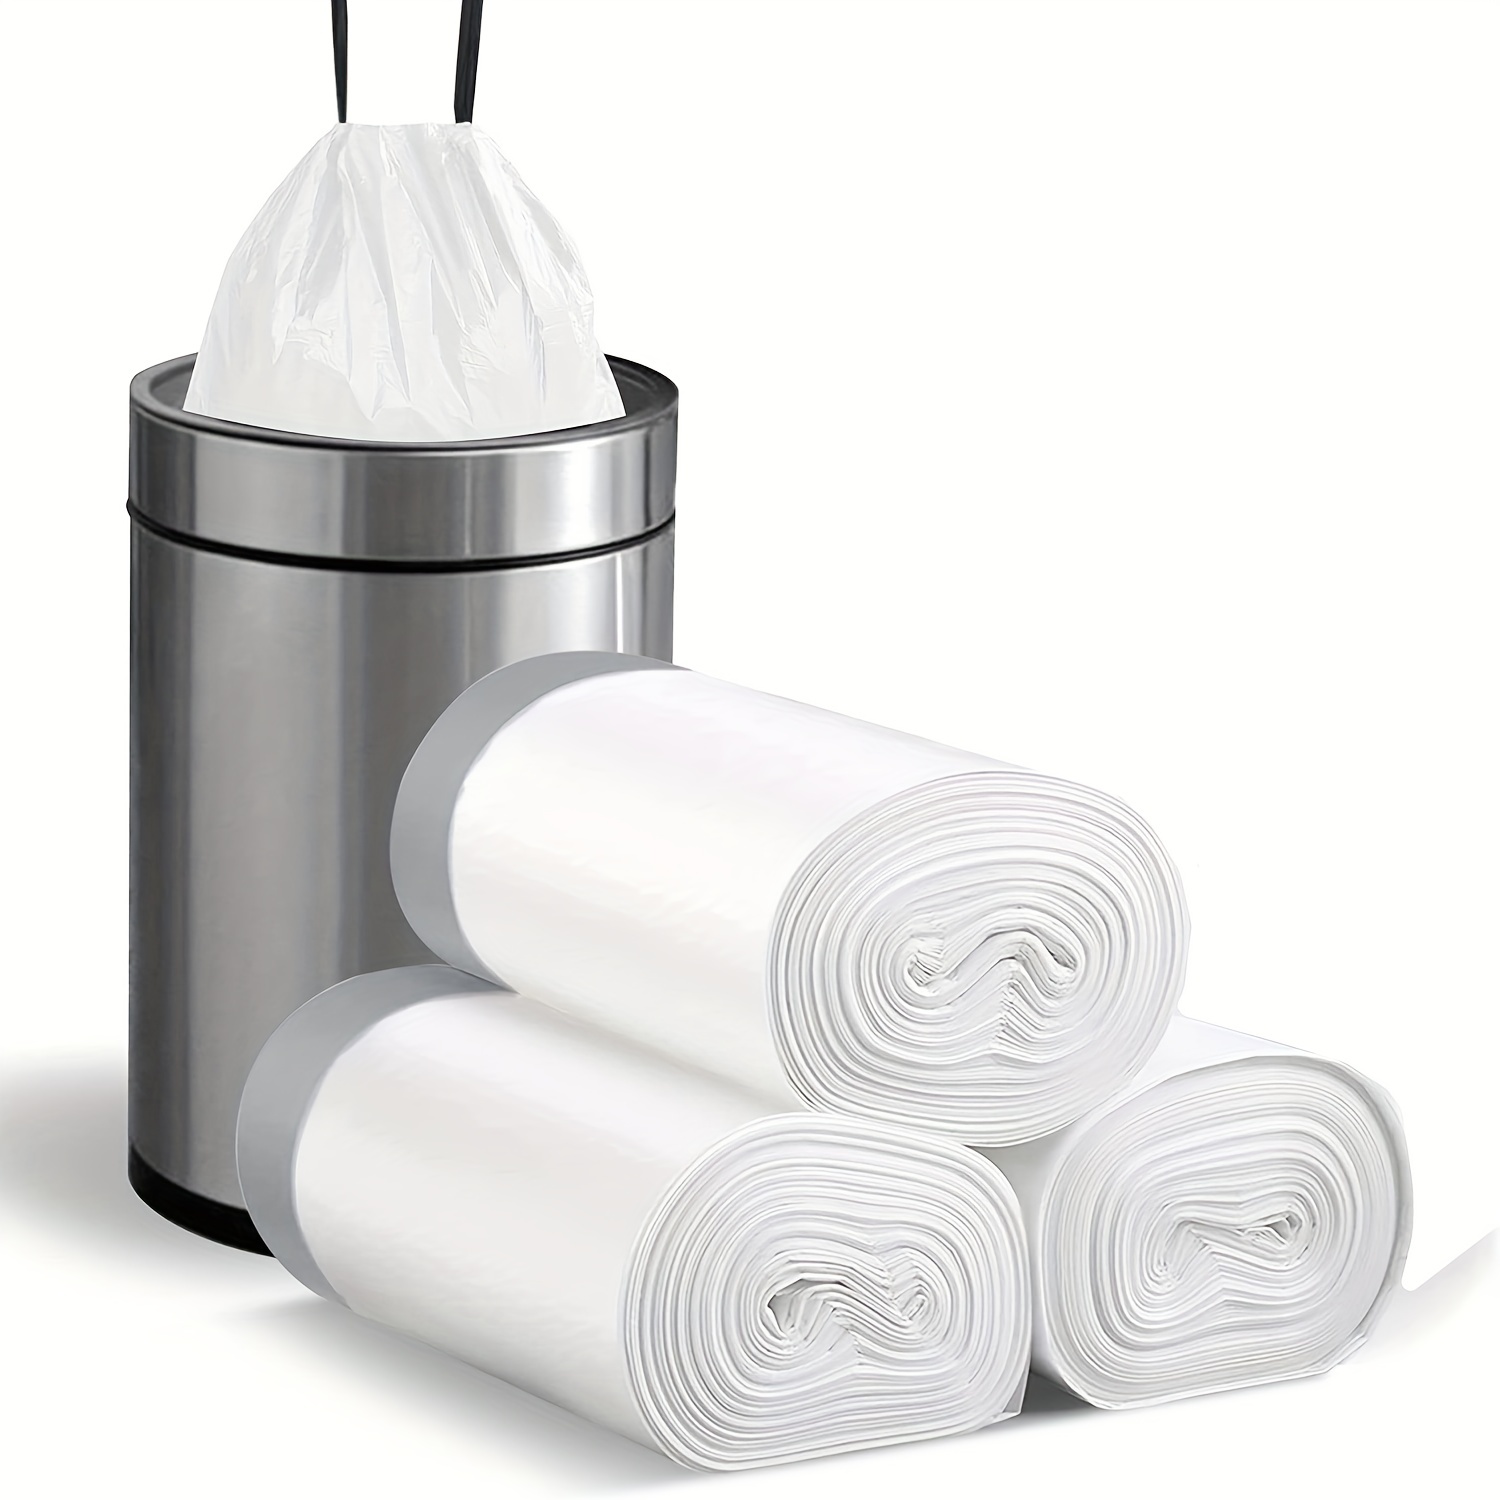 Small Trash Bags 4 Gallon - 100 Count 4 Gallon Trash Bag, Small Garbage  Bags for Office Bedroom Bathroom Trash Bags, White 4 Gal Small Trash Can